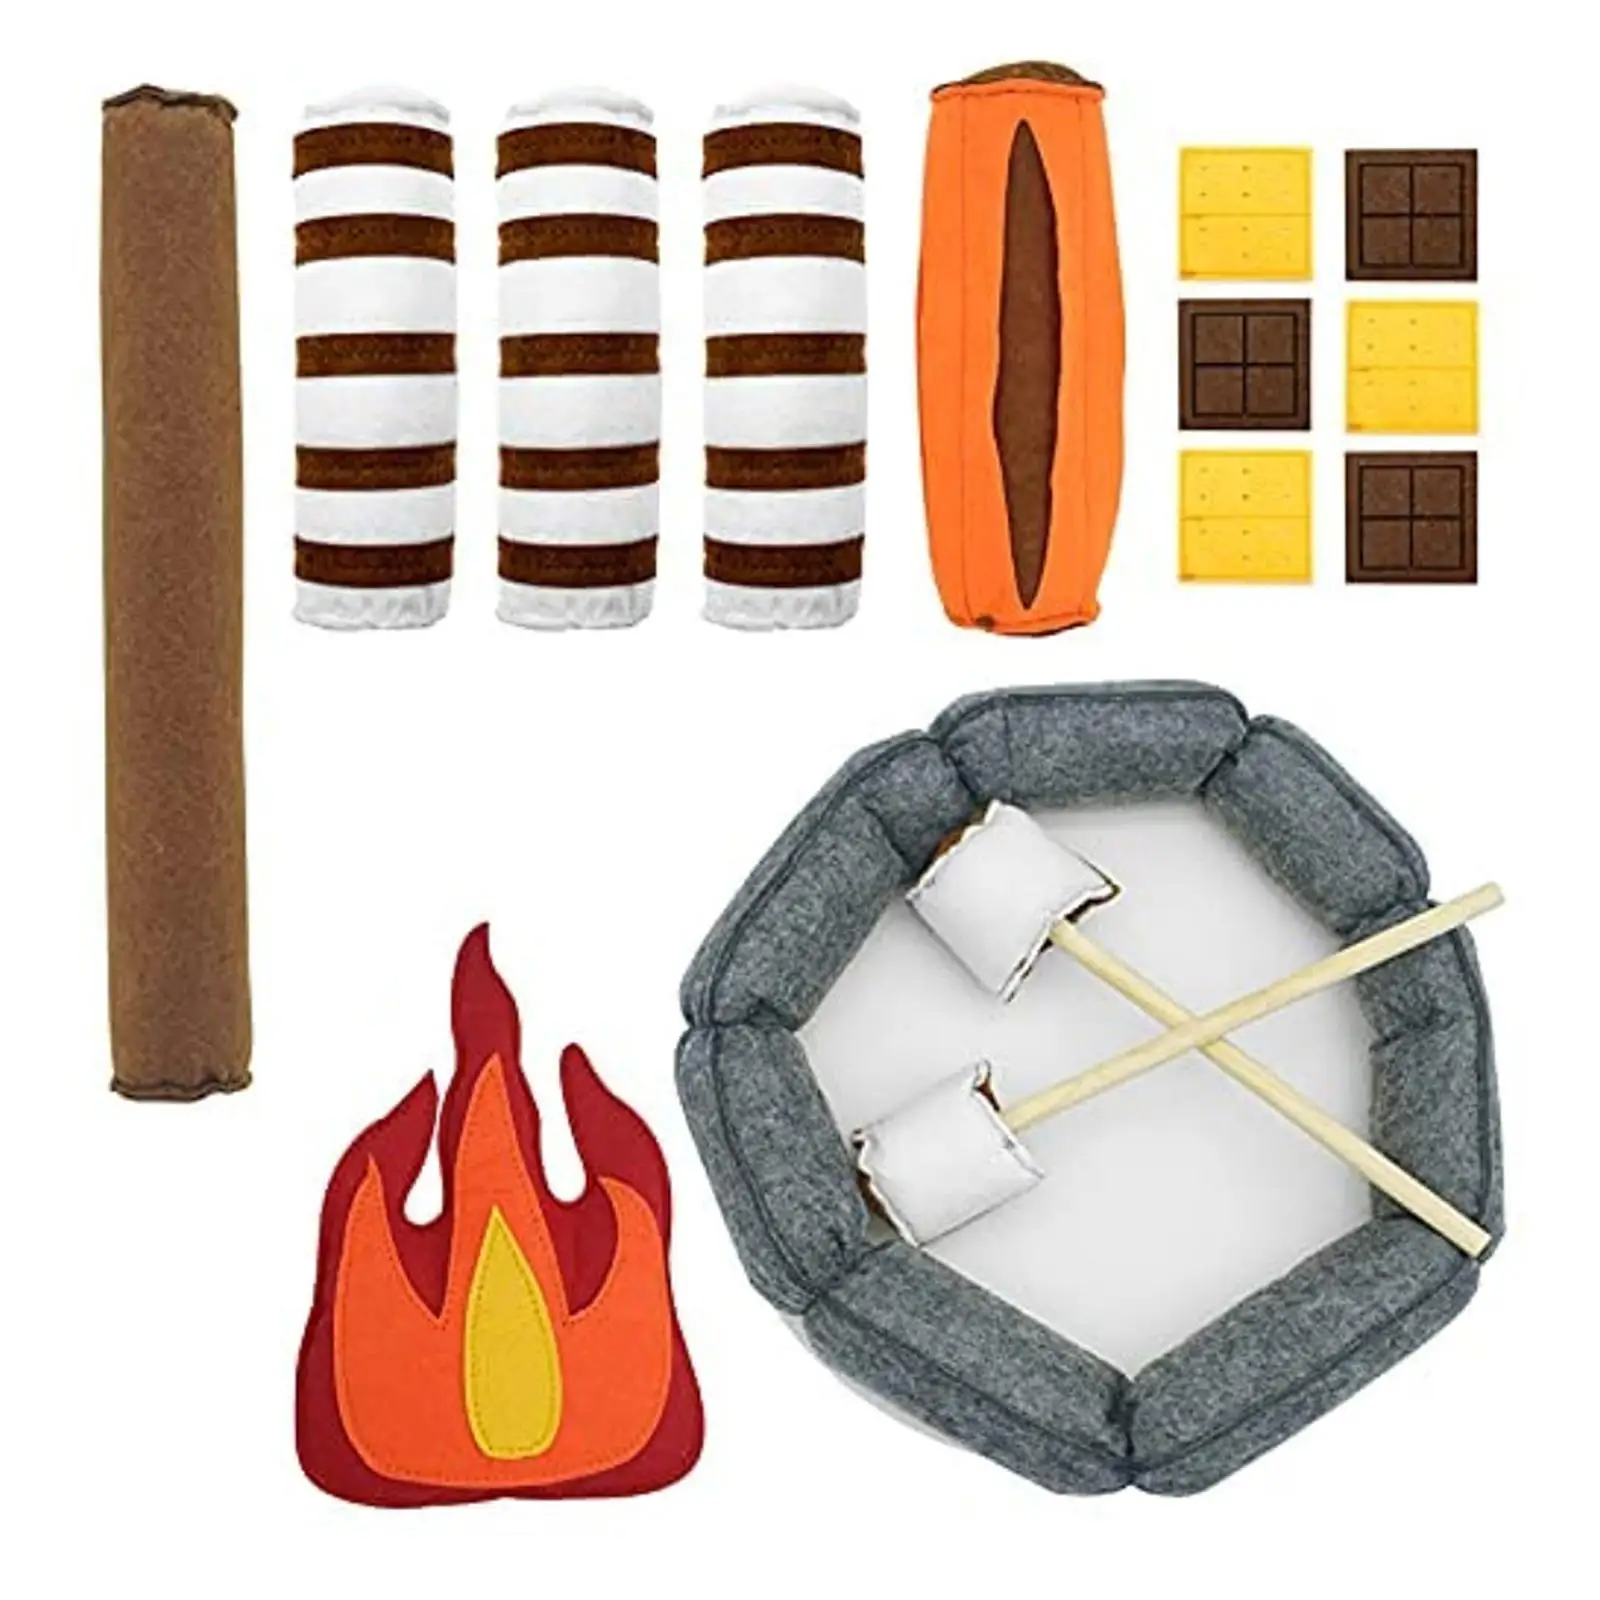 Pretend Play Campfire Plush Doll Living Room Soft Housewarming Gifts Realistic for Kids Toddlers Indoor Outdoor Toys Plush Toy